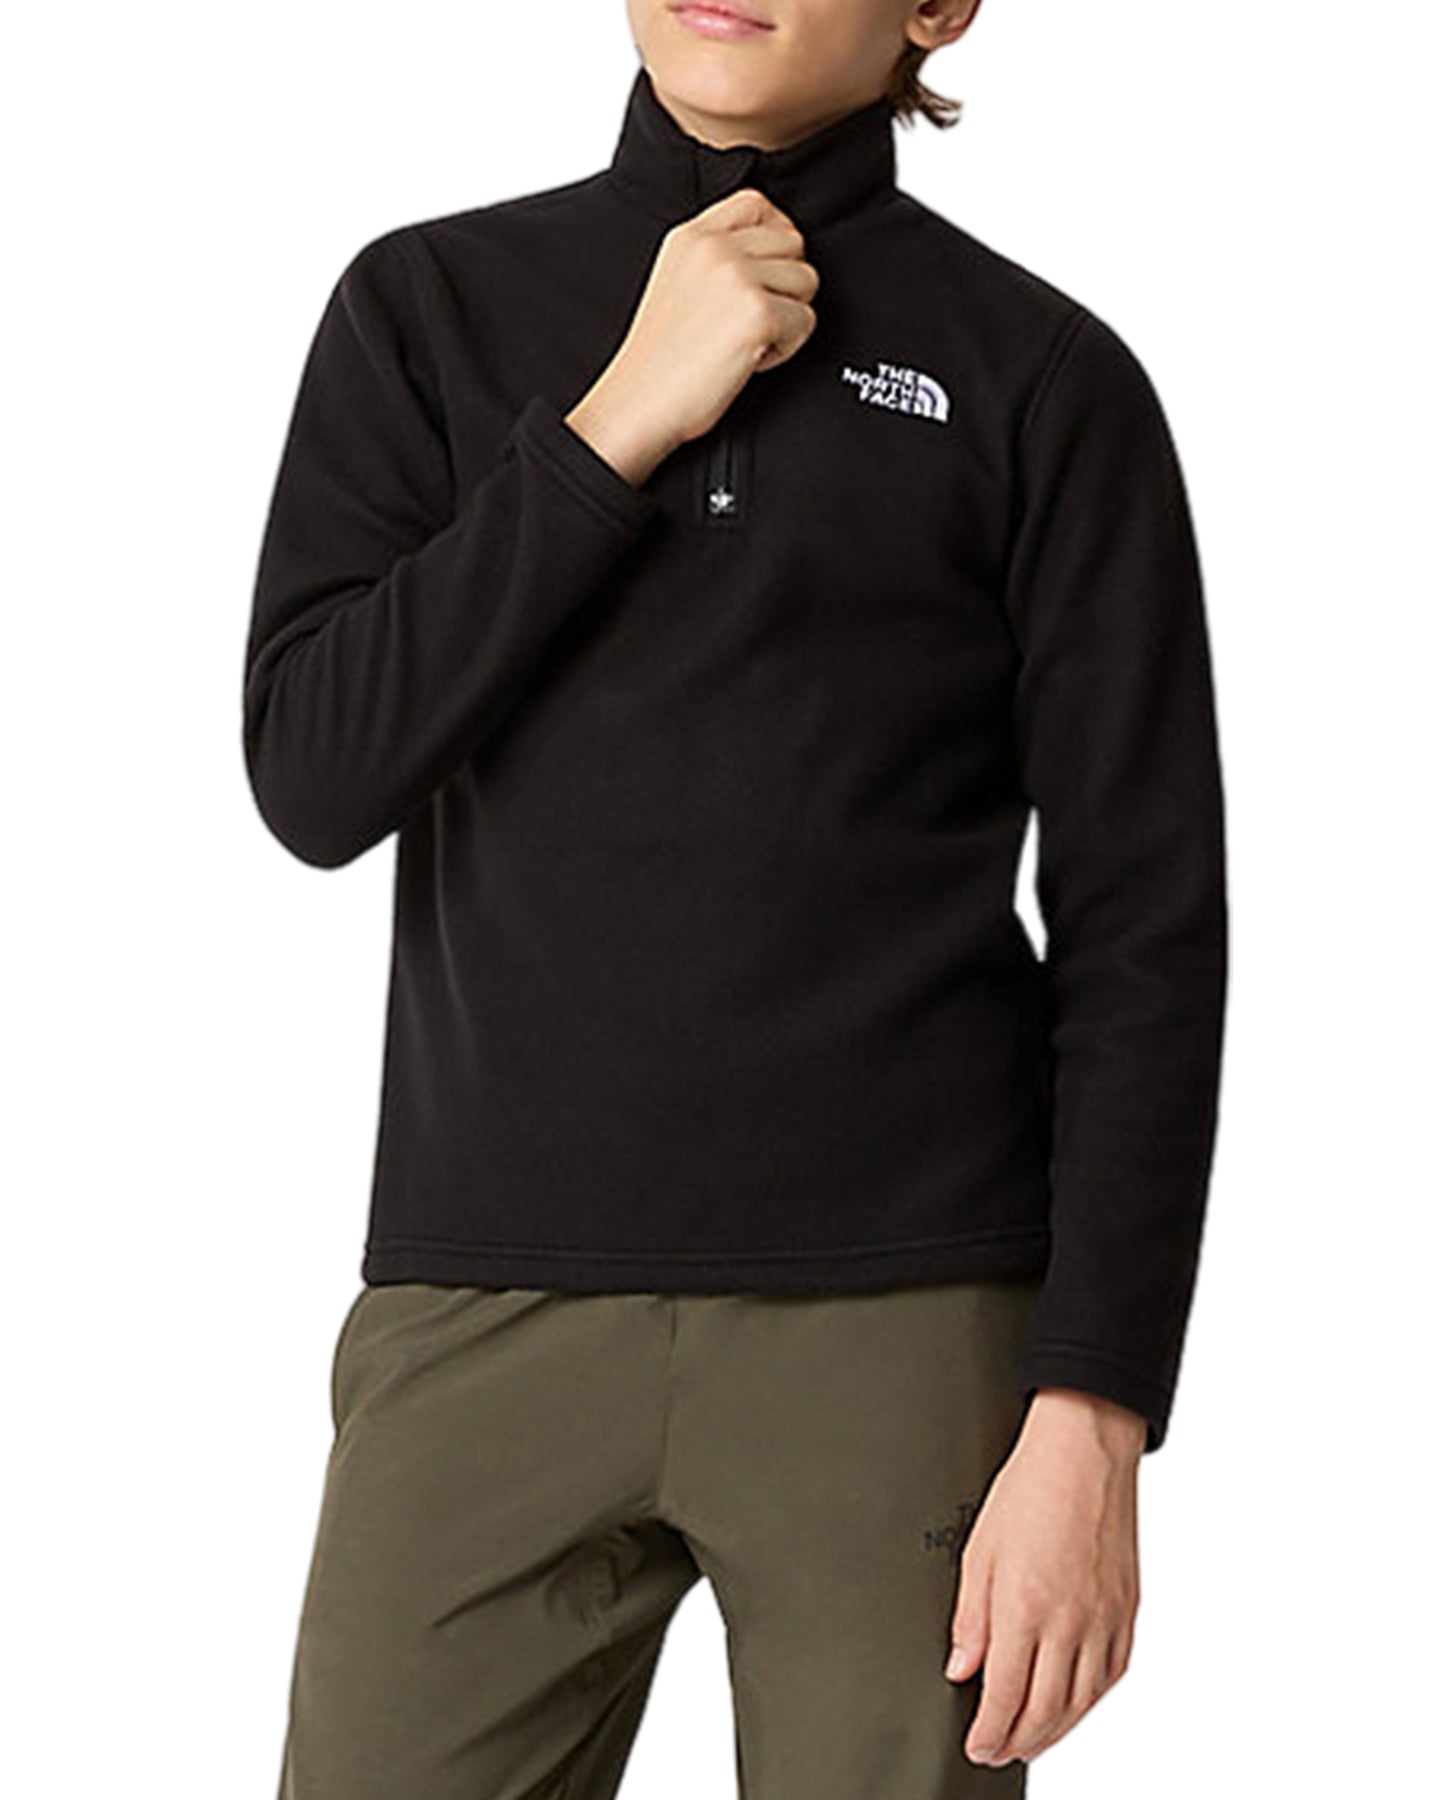 The North Face Teen Glacier 1/4 Zip Pullover - Cave Blue  Shop Clothing at  Trojan Wake Ski Snow & Snow Skiers Warehouse